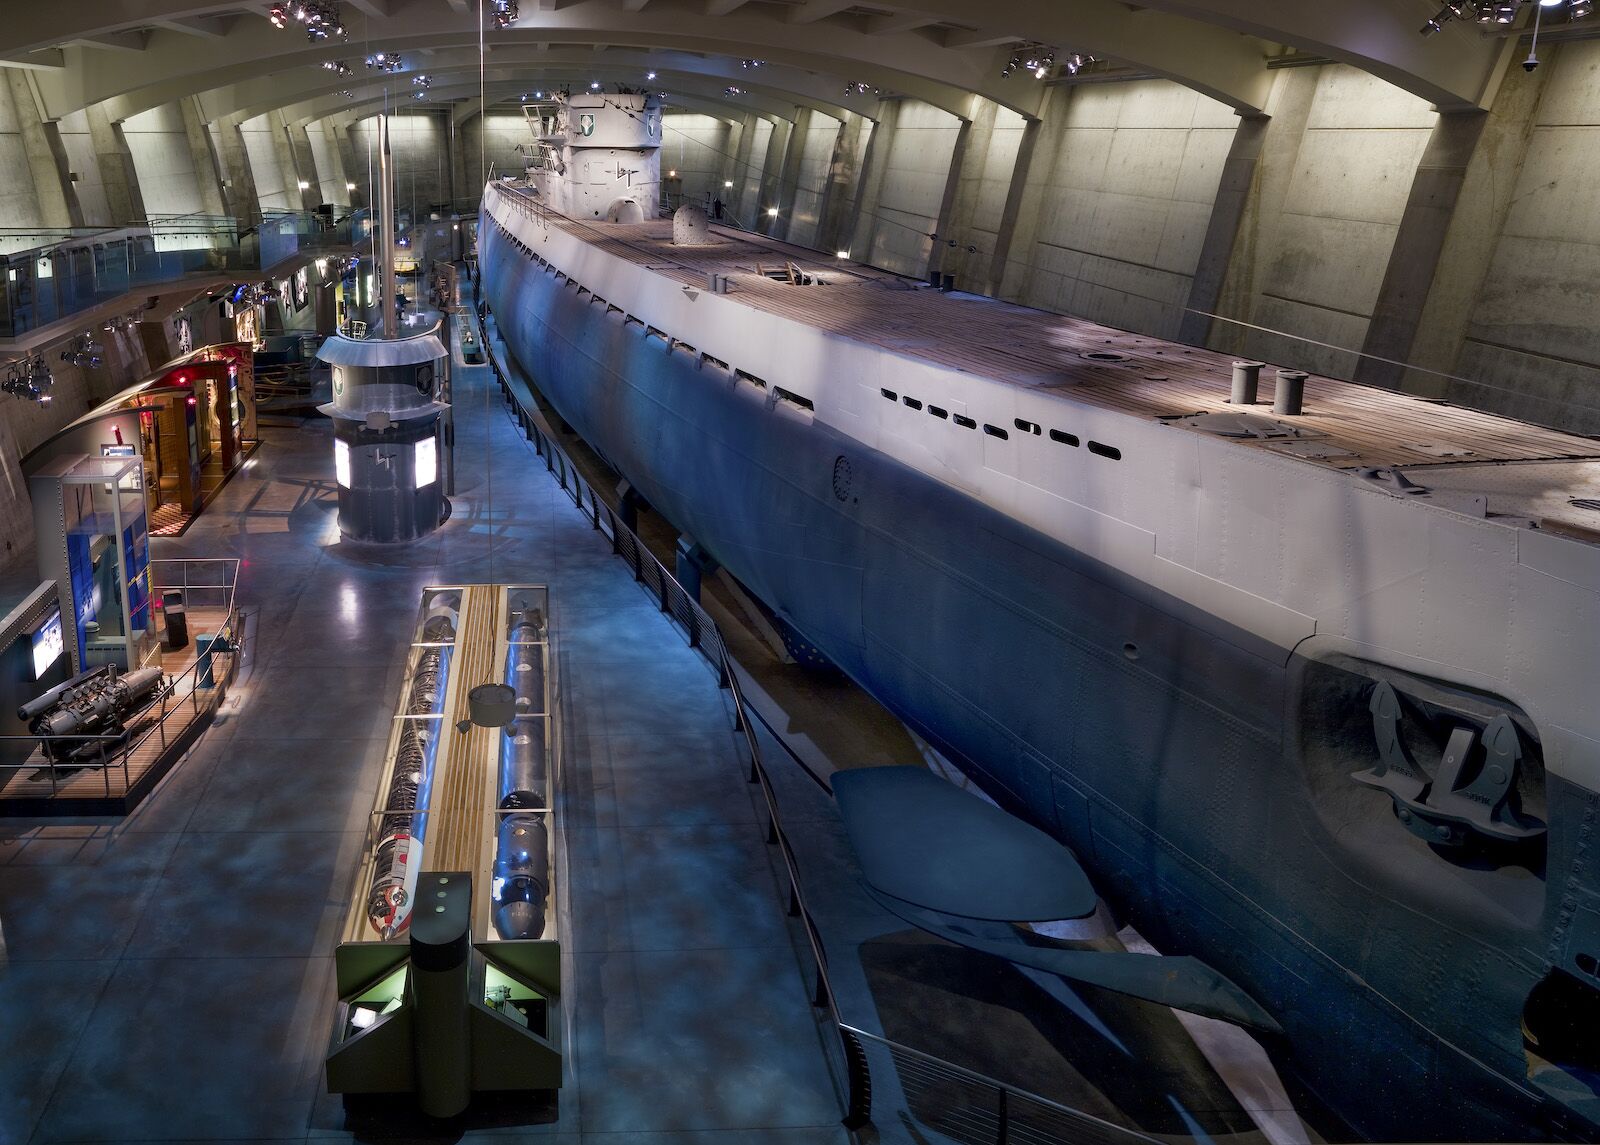 U-505 submarine at the Chicago Museum of Science and Industry